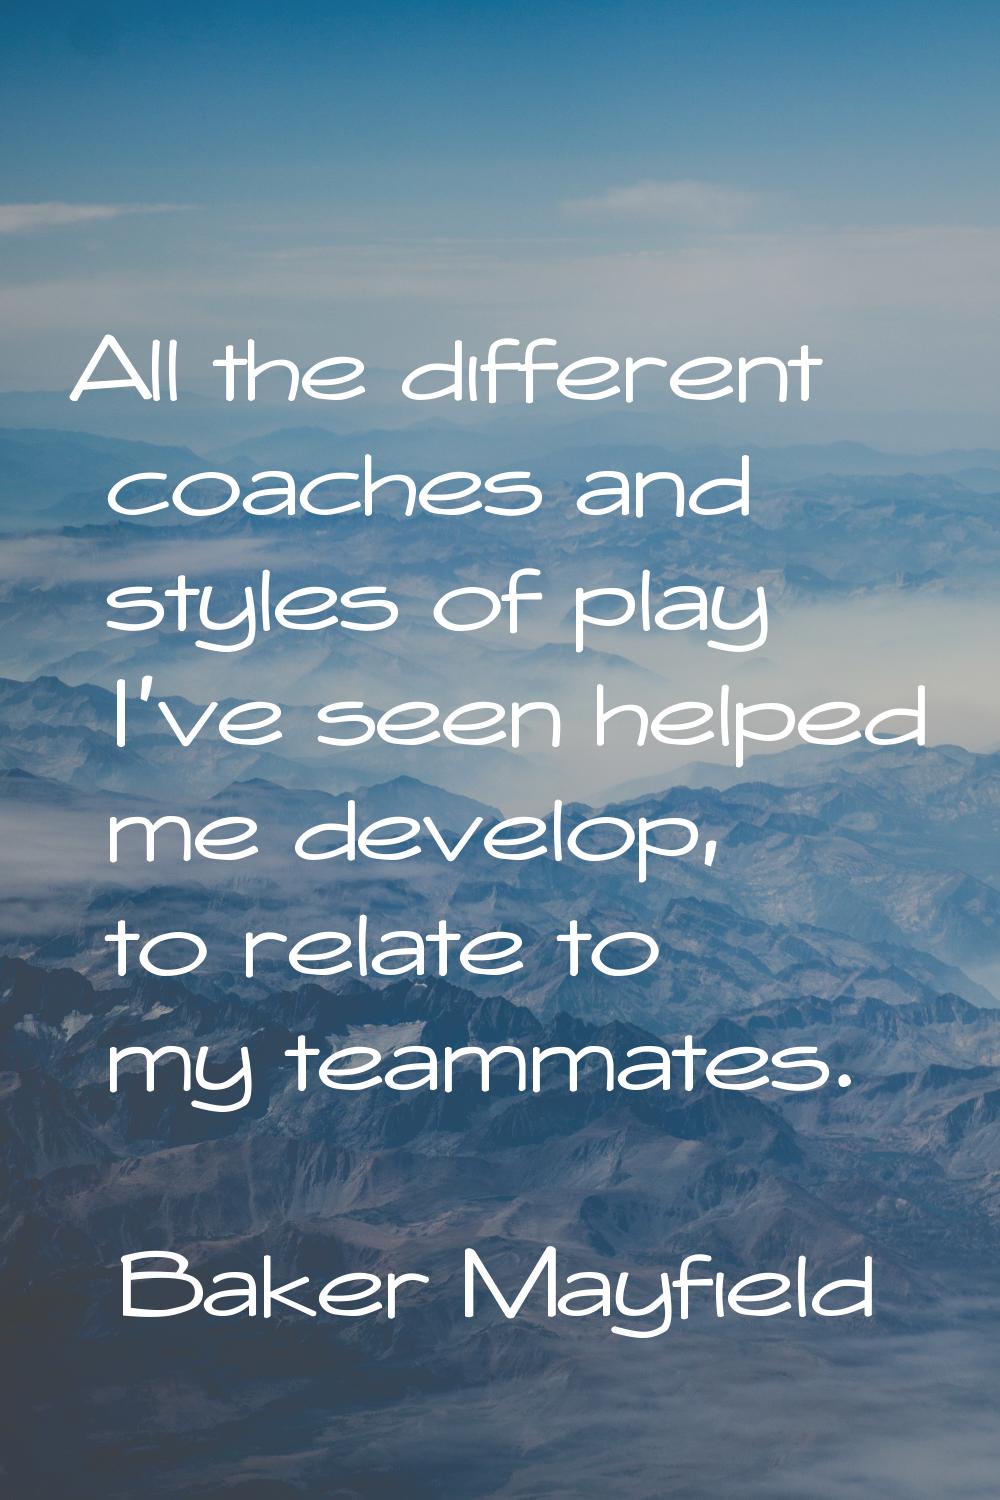 All the different coaches and styles of play I've seen helped me develop, to relate to my teammates